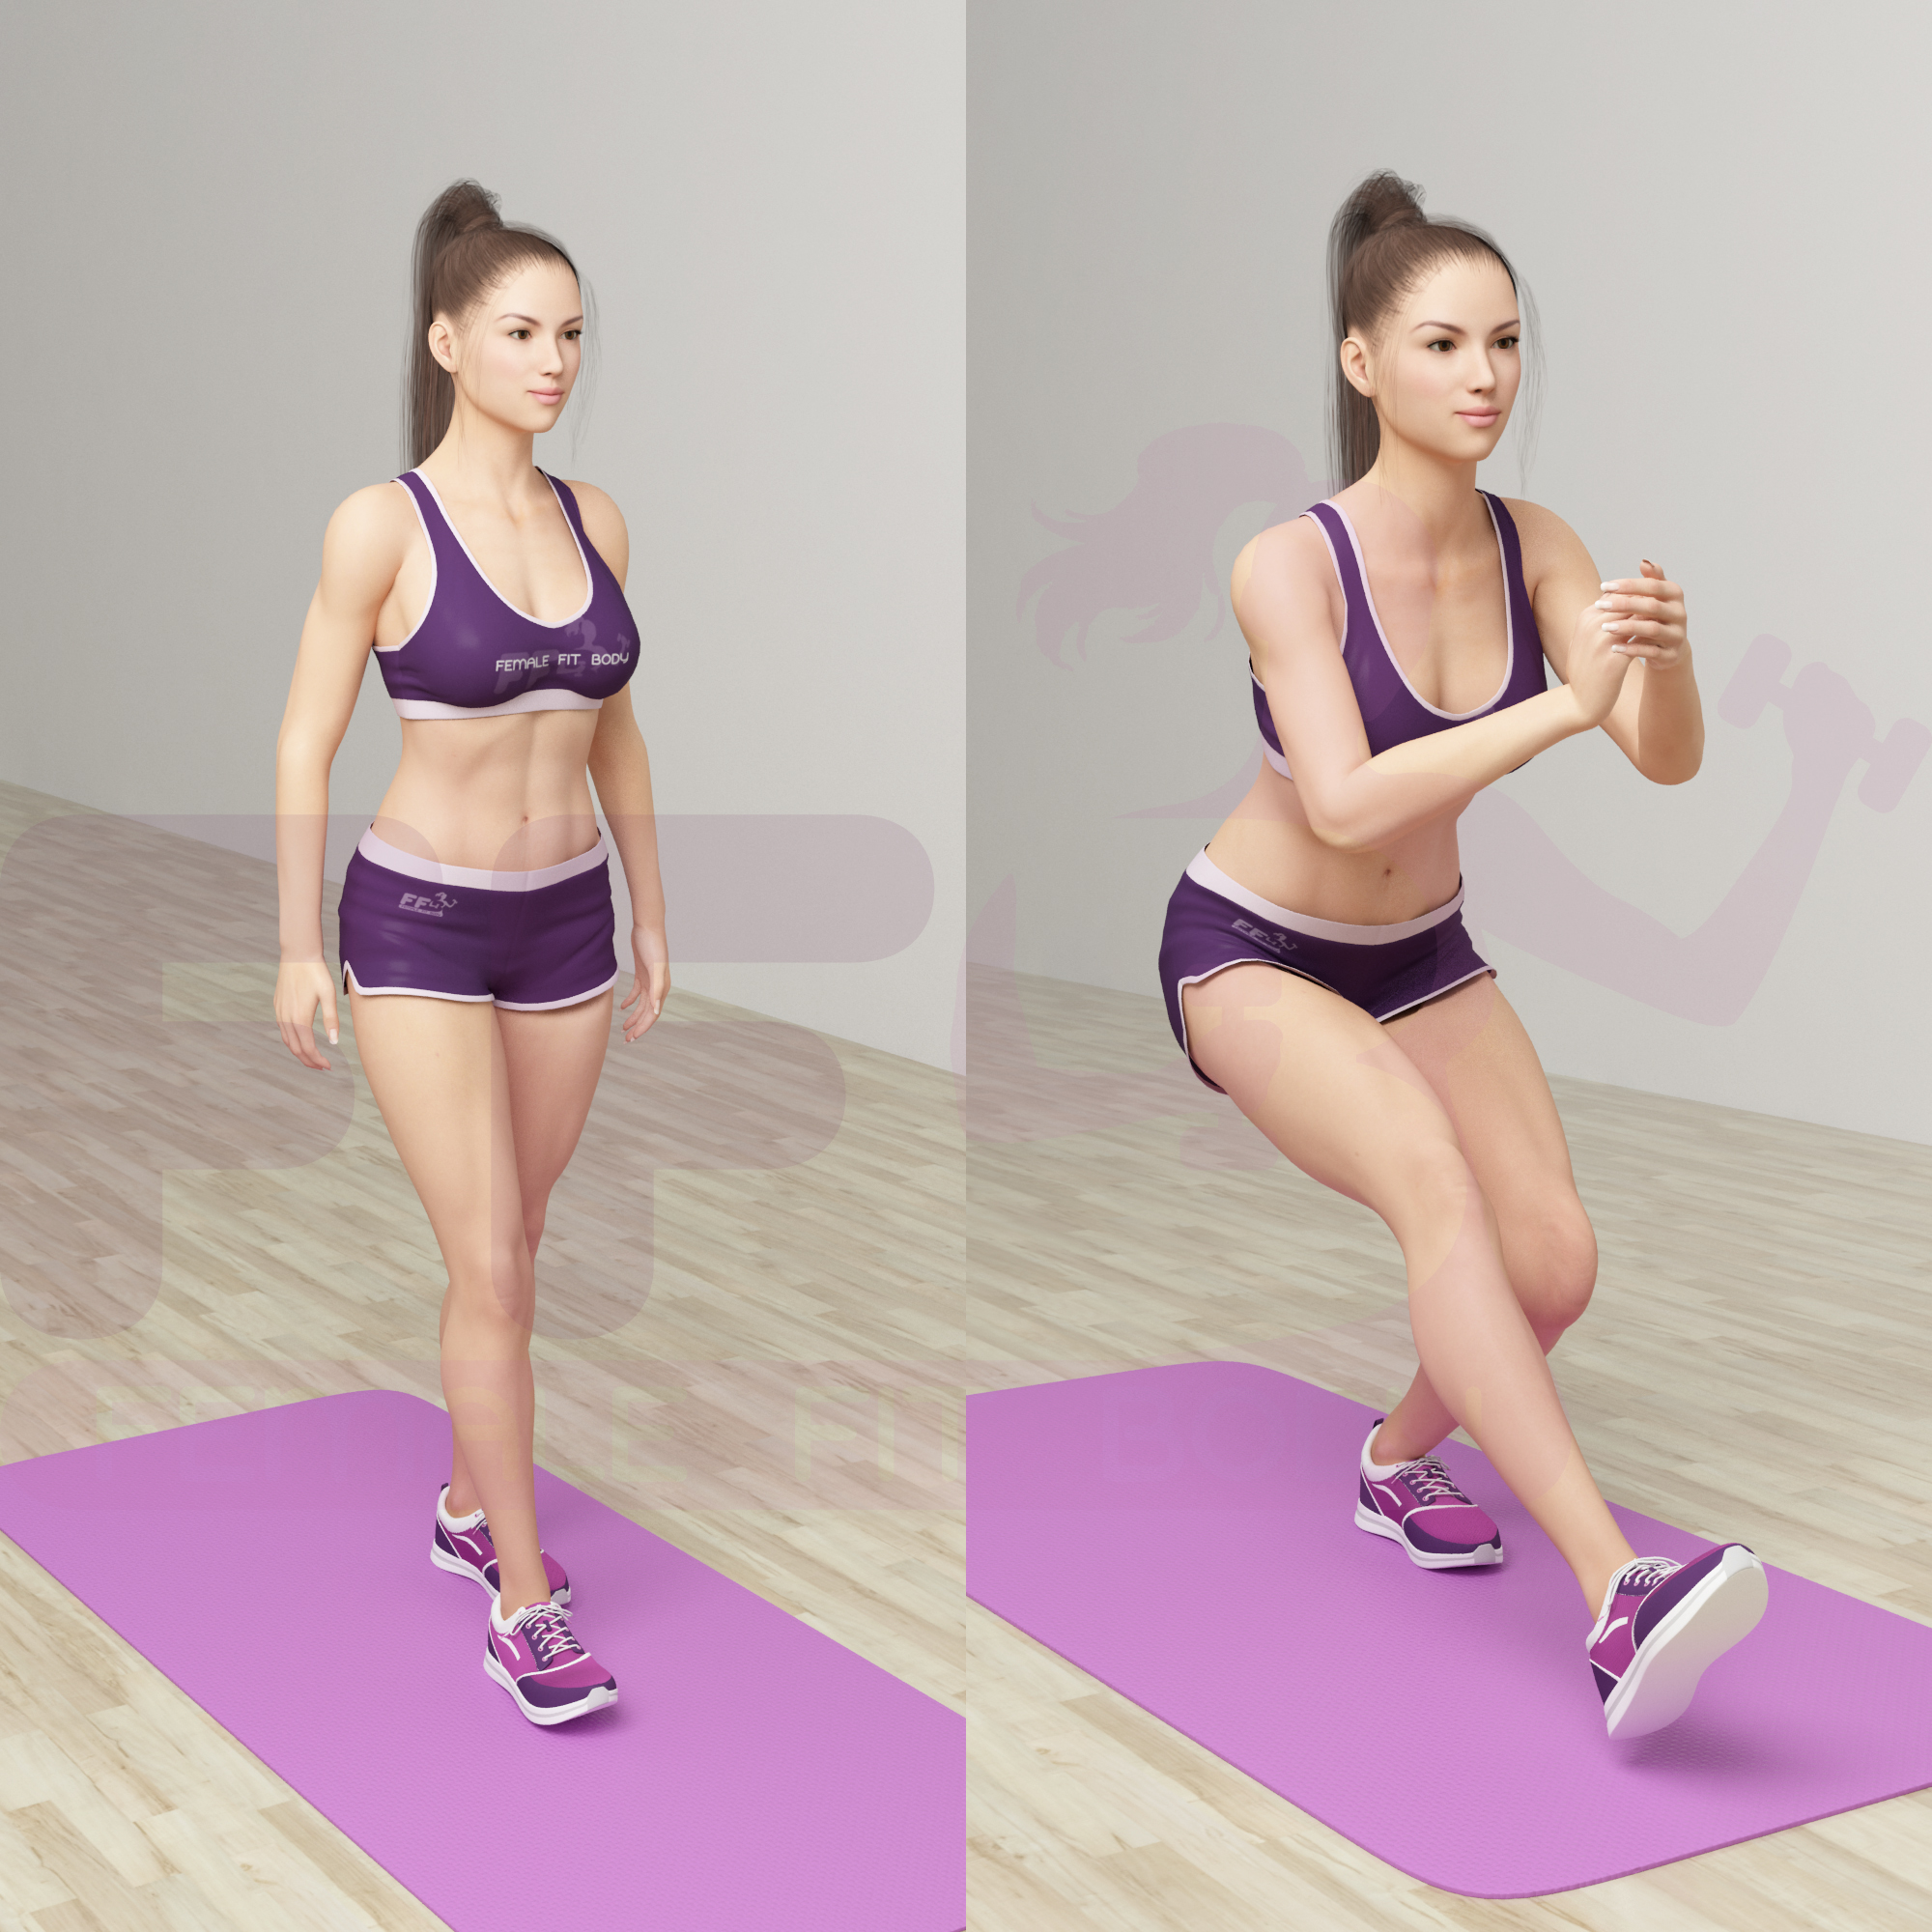 12 Exercises to Tighten Your Butt and Legs in 4 Weeks